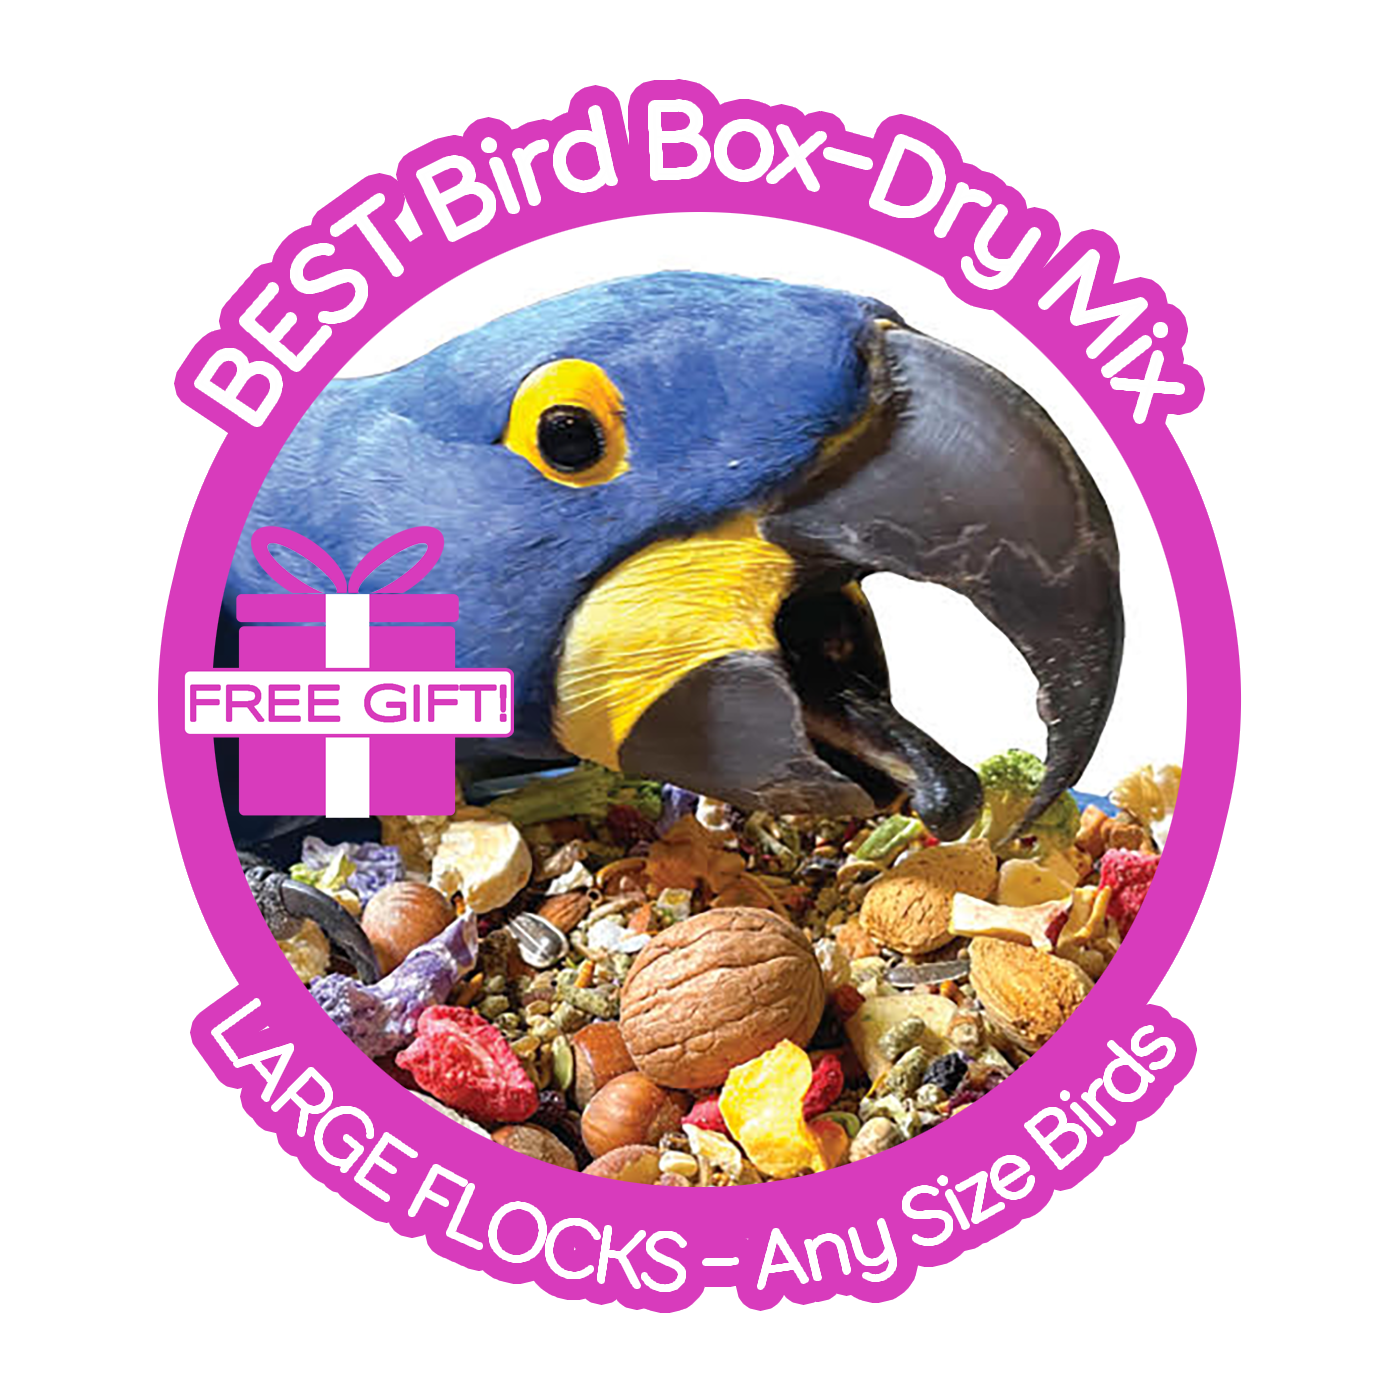 Thrive! Best Bird Box — 4 LARGE Sized Flocks (any size birds) or for anyone wanting more value & volume.